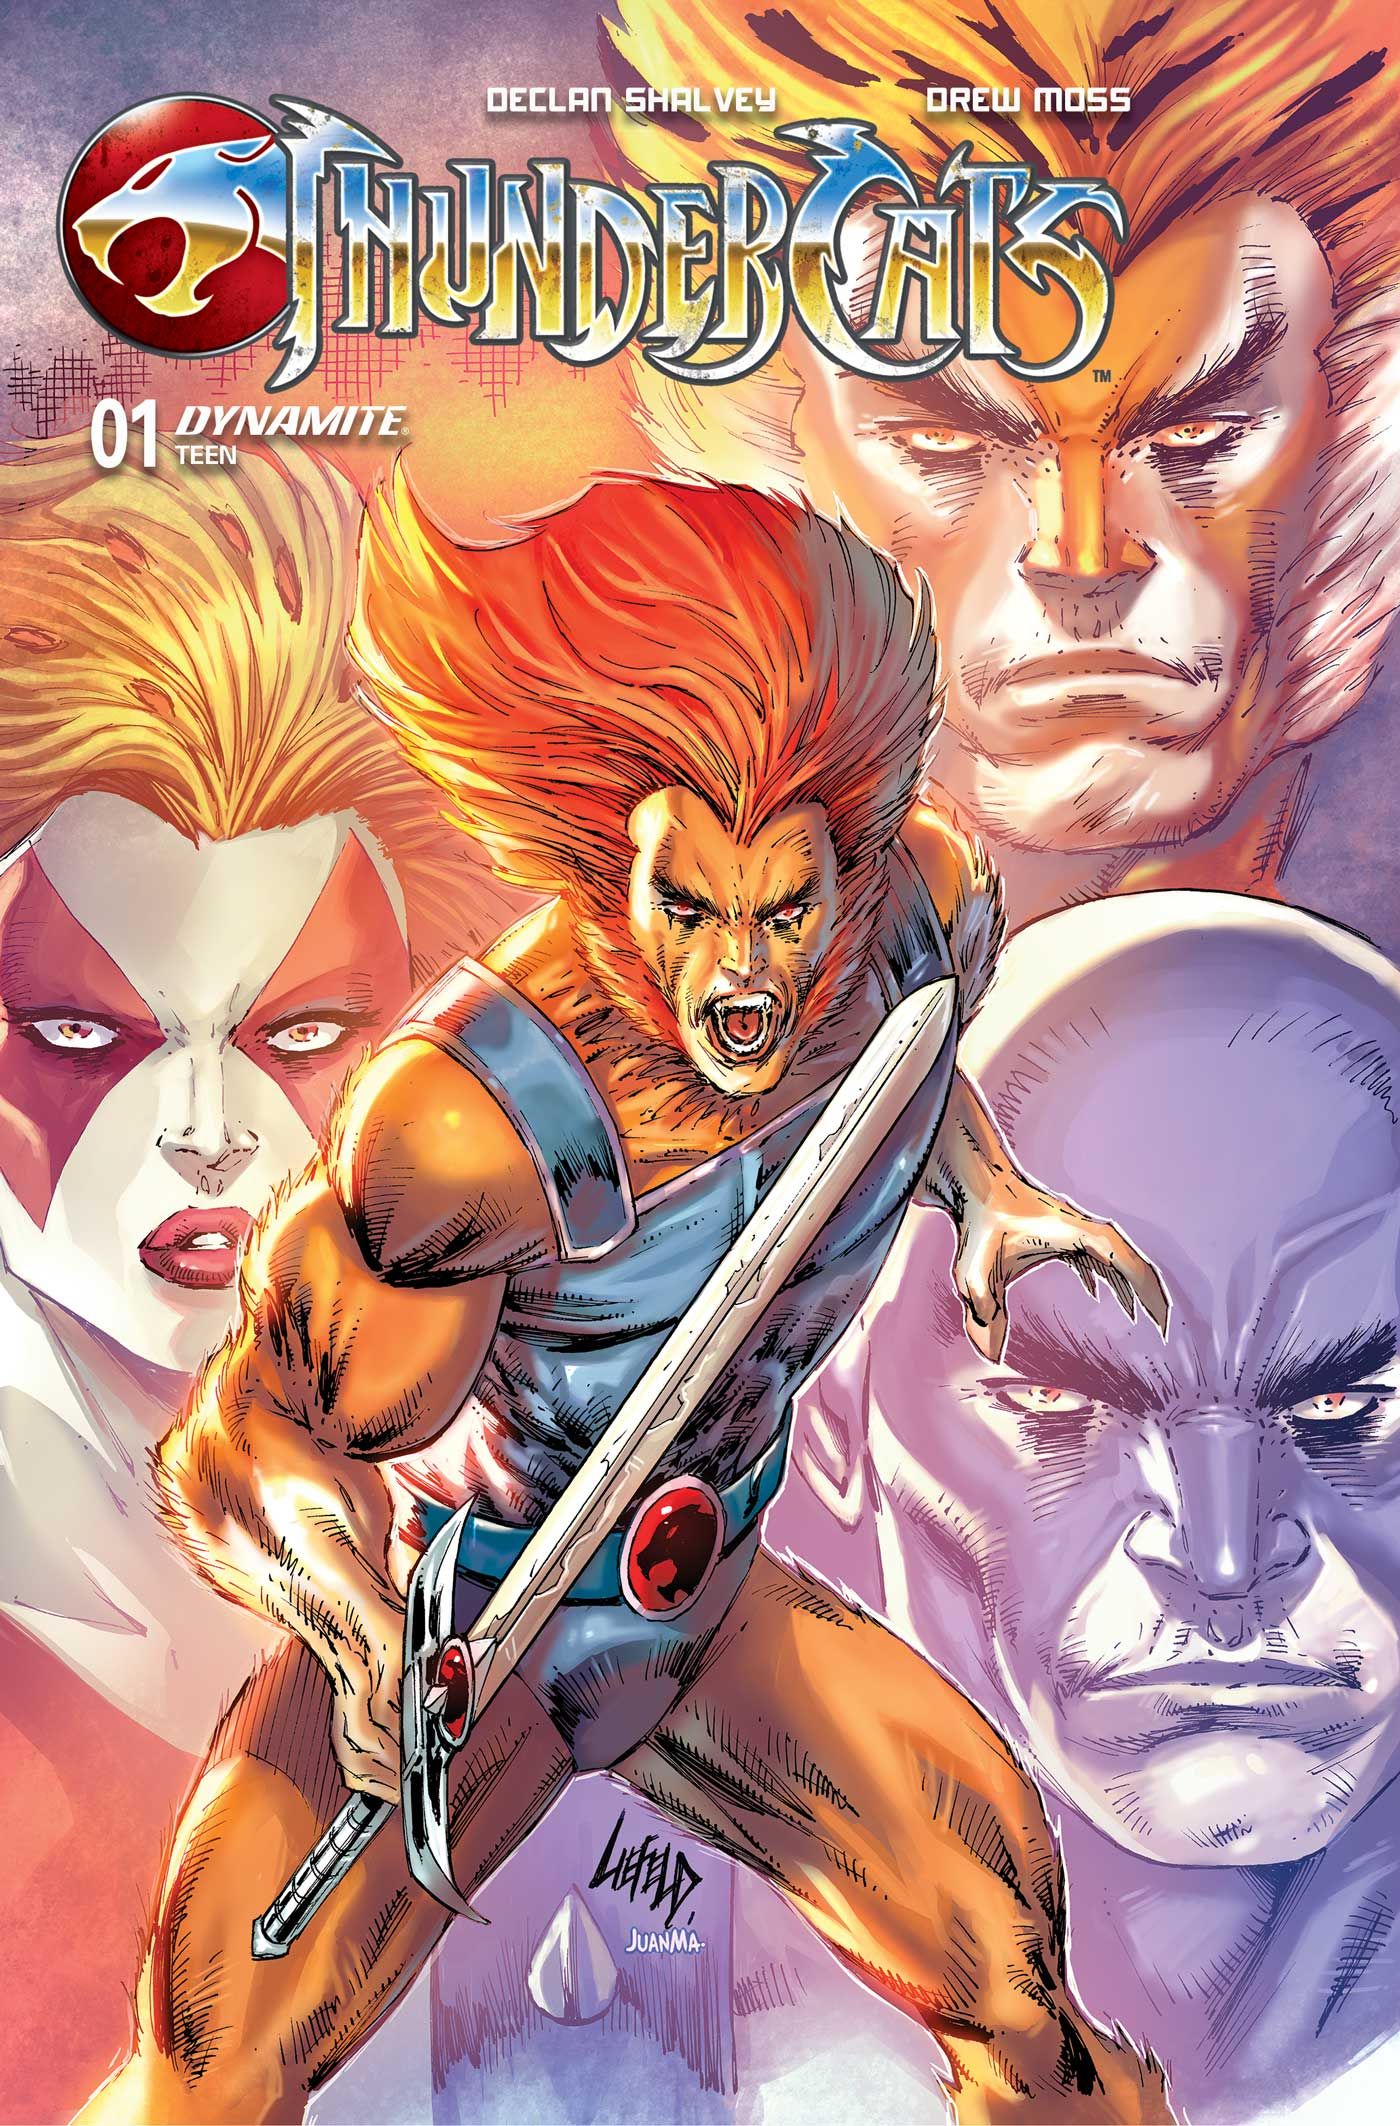 Rob Liefeld's variant for Thundercats #1